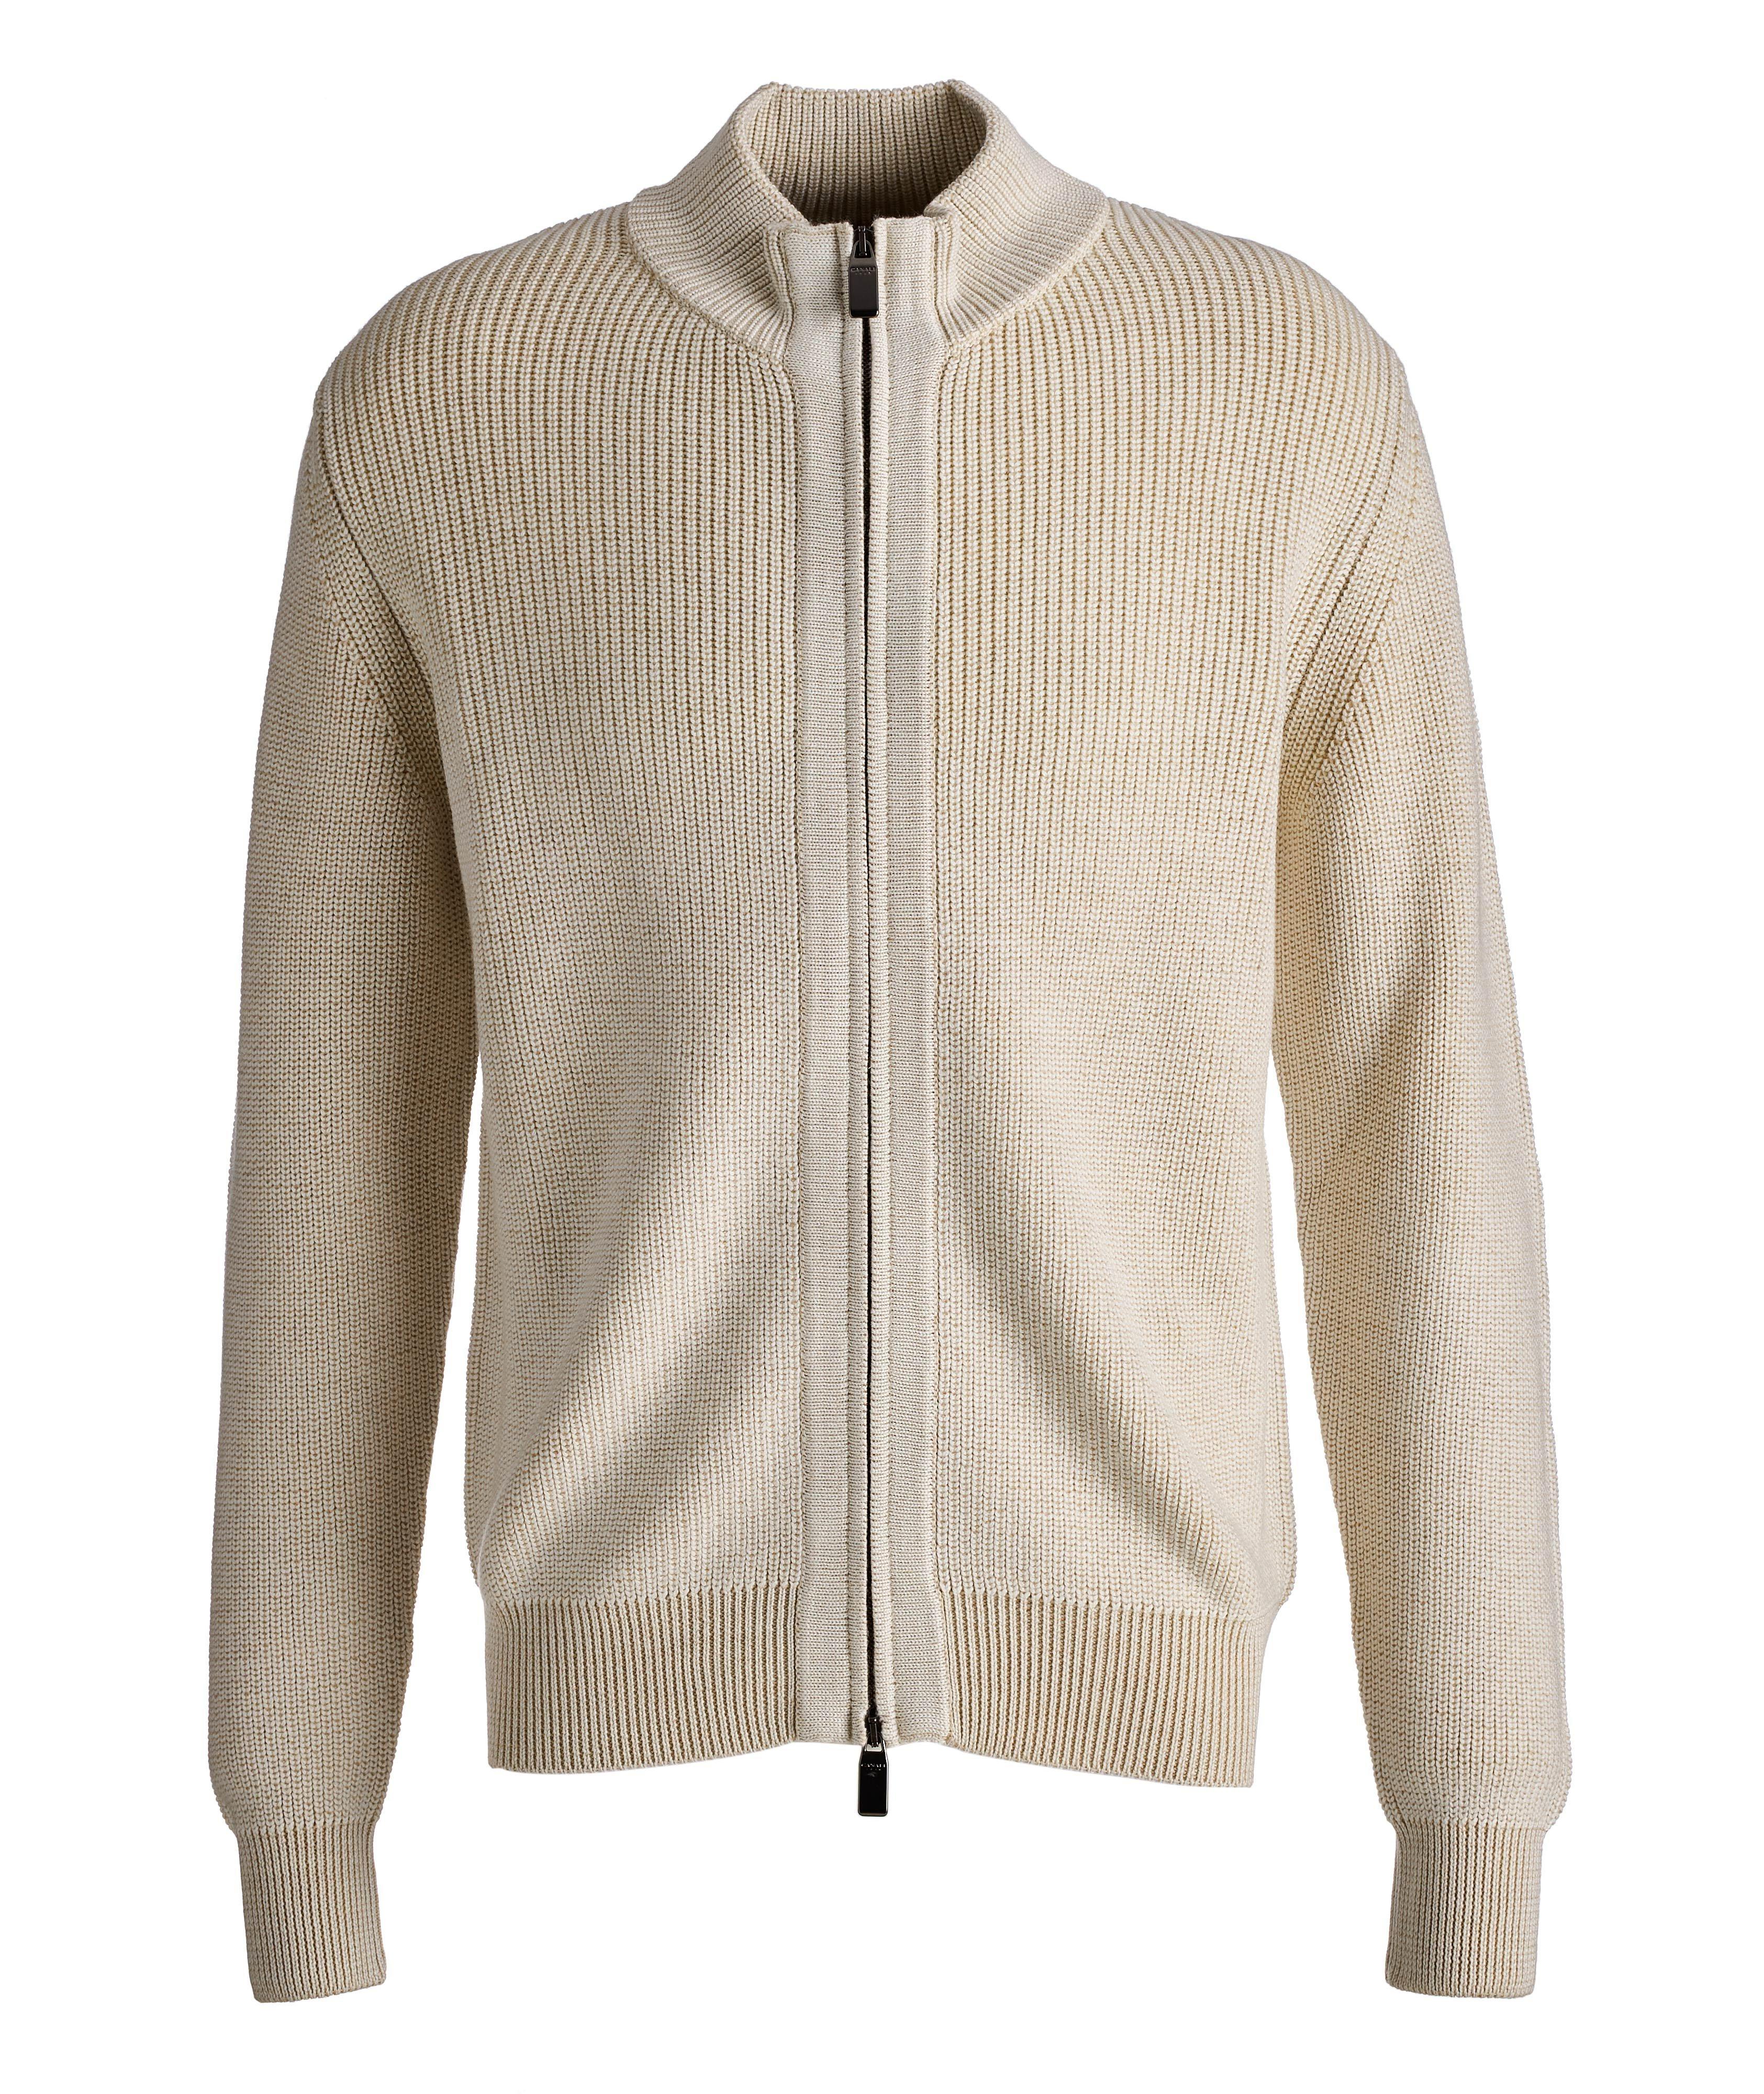 Zip-Up Cable Knit Wool Sweater image 0